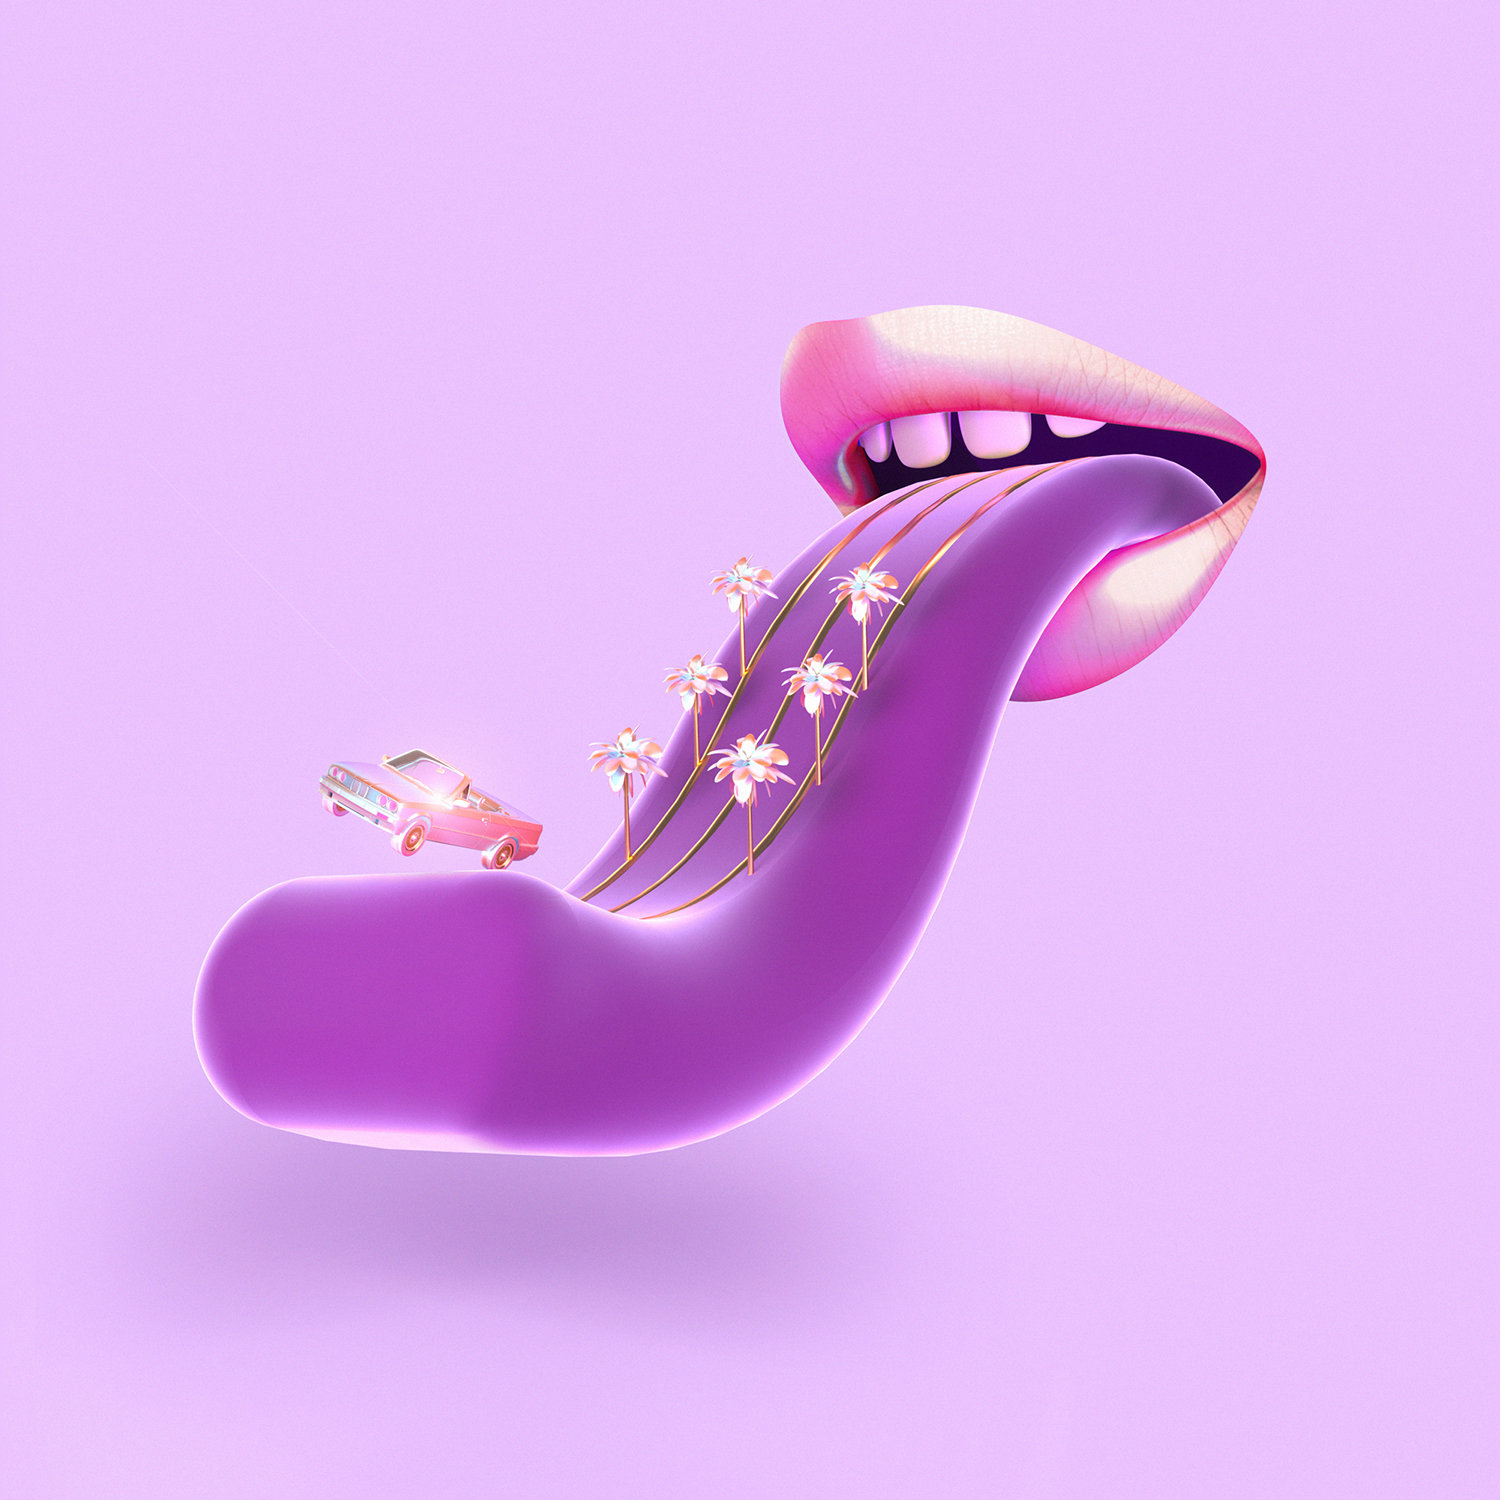 Tongue and palm trees, 3d digital art, pink and purple